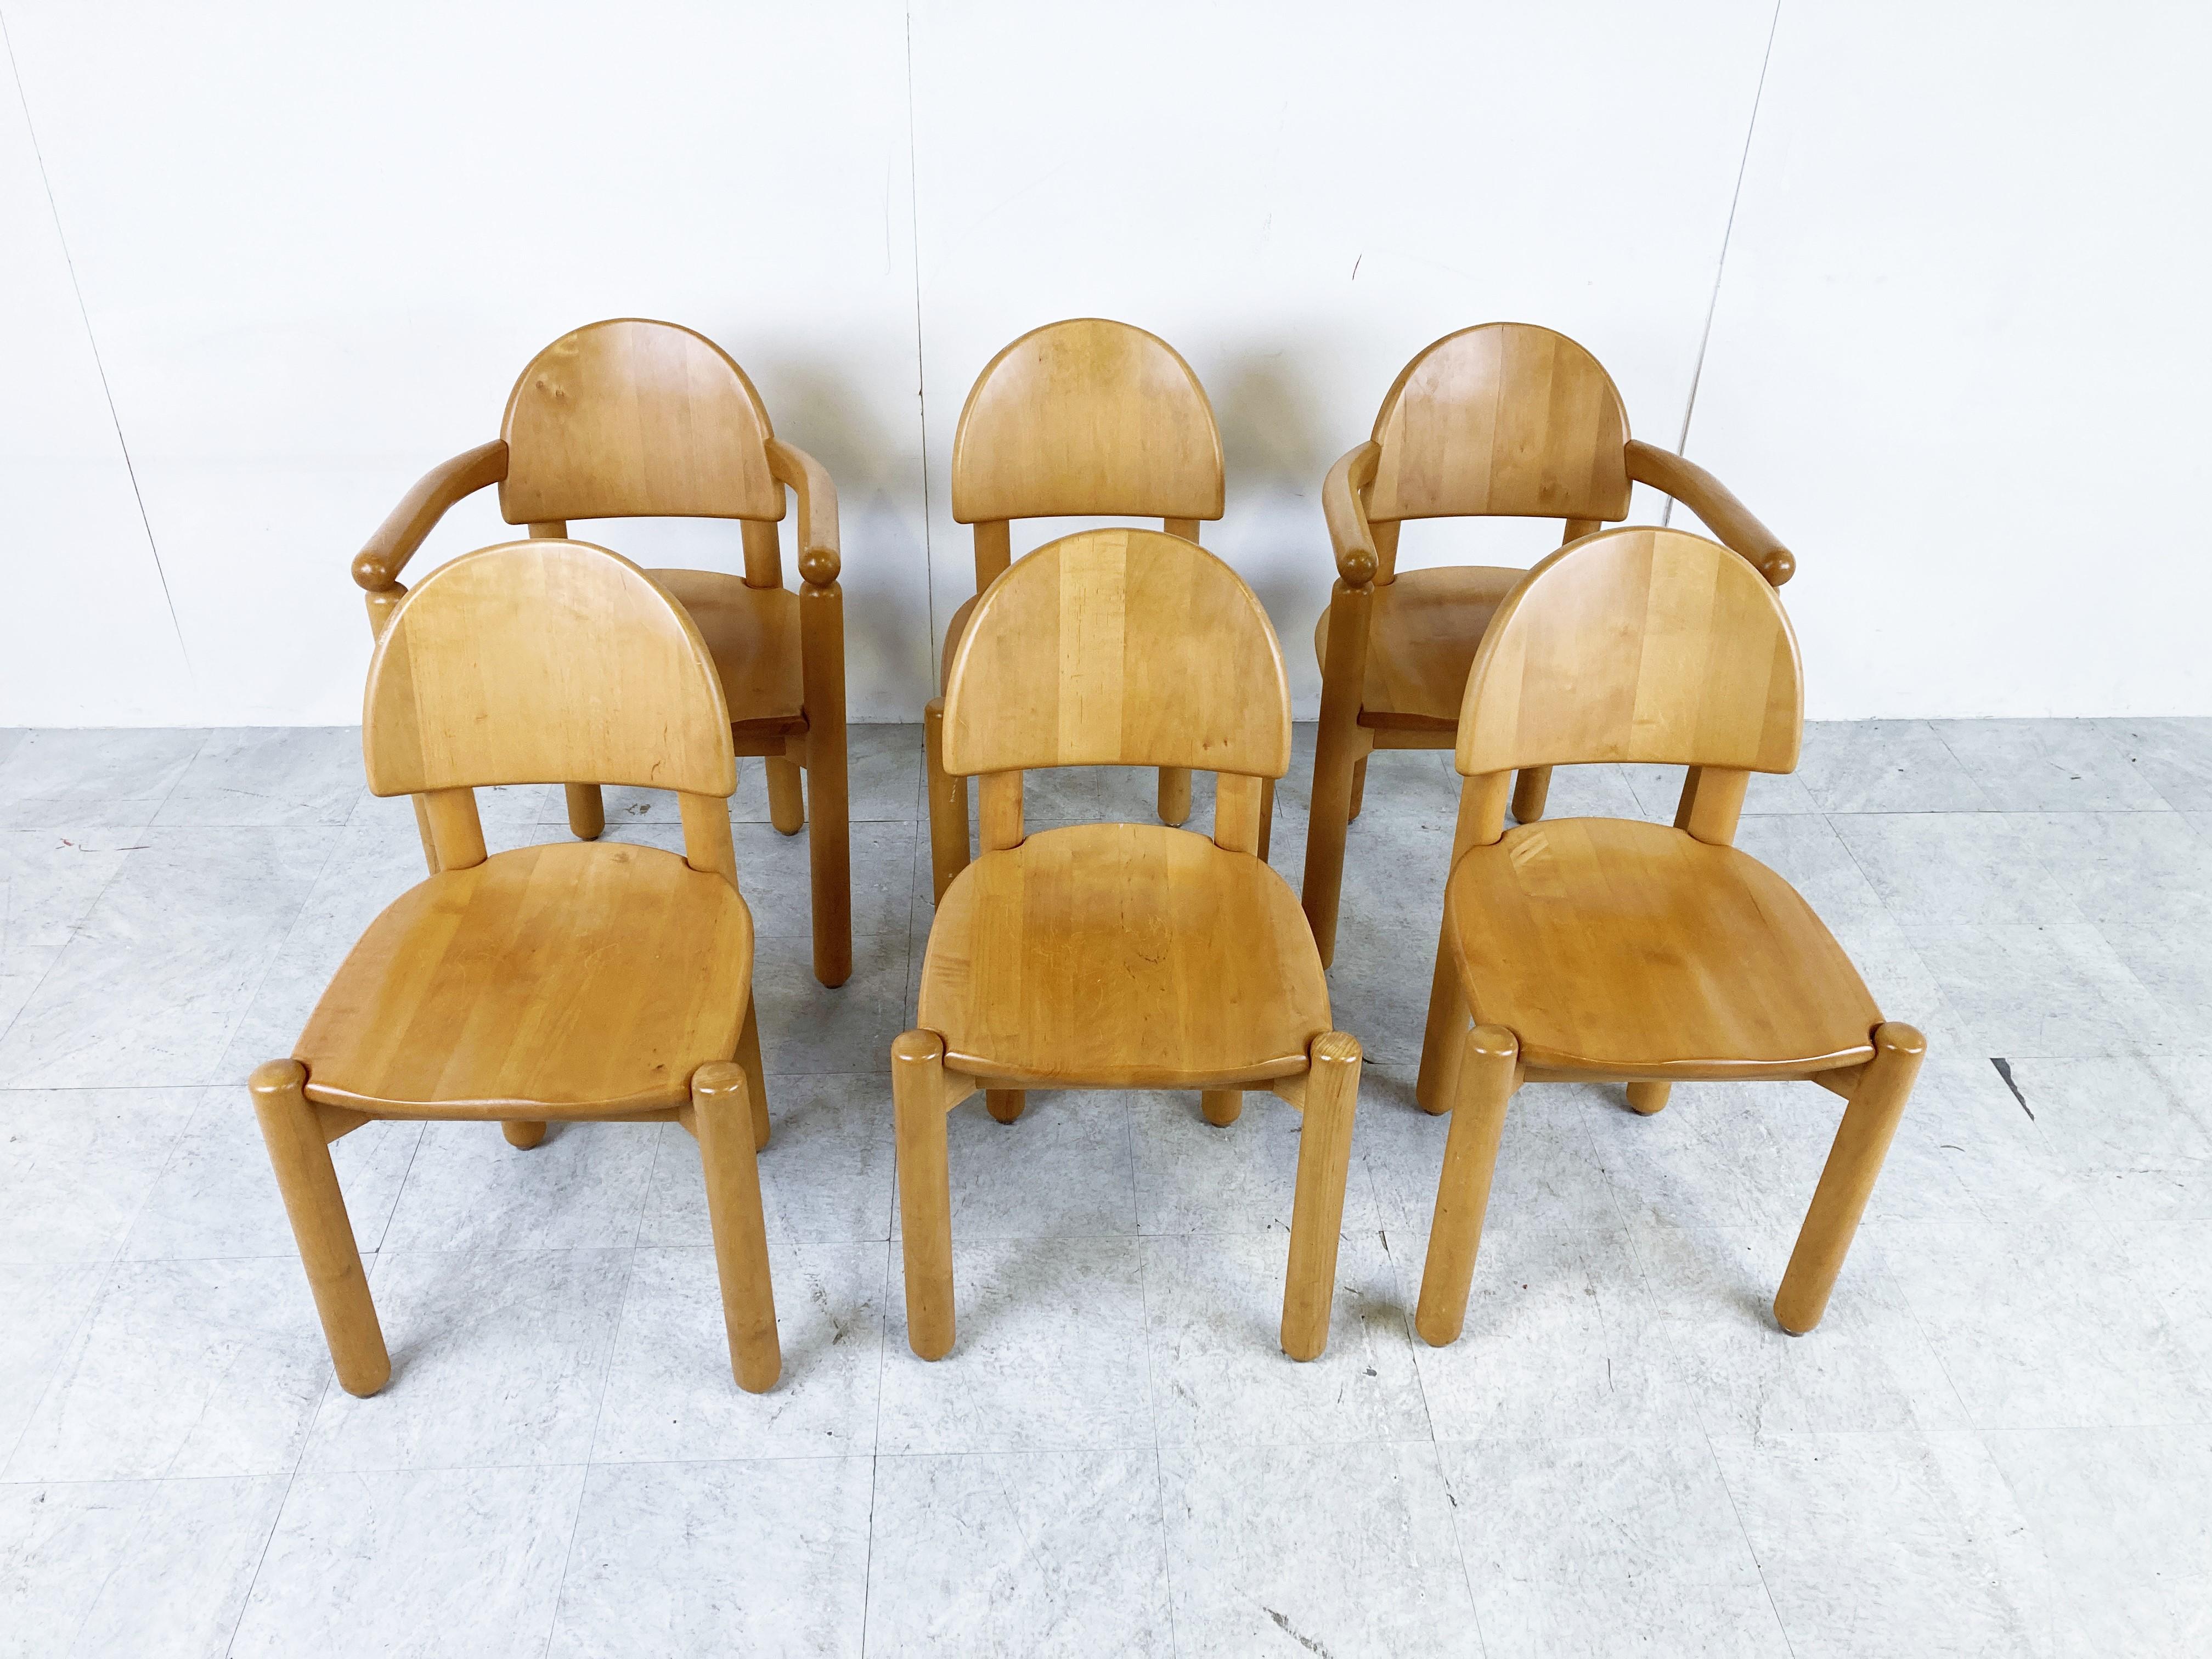 Set of 6 scandinavian solid pine wood dining chairs by Rainer Daumilier for Hirtshals Savvaerk

Four without and two with armrests.

The chairs are in good condition.

Nicely shaped armrests and seats.

Beautiful timeless design.

Good